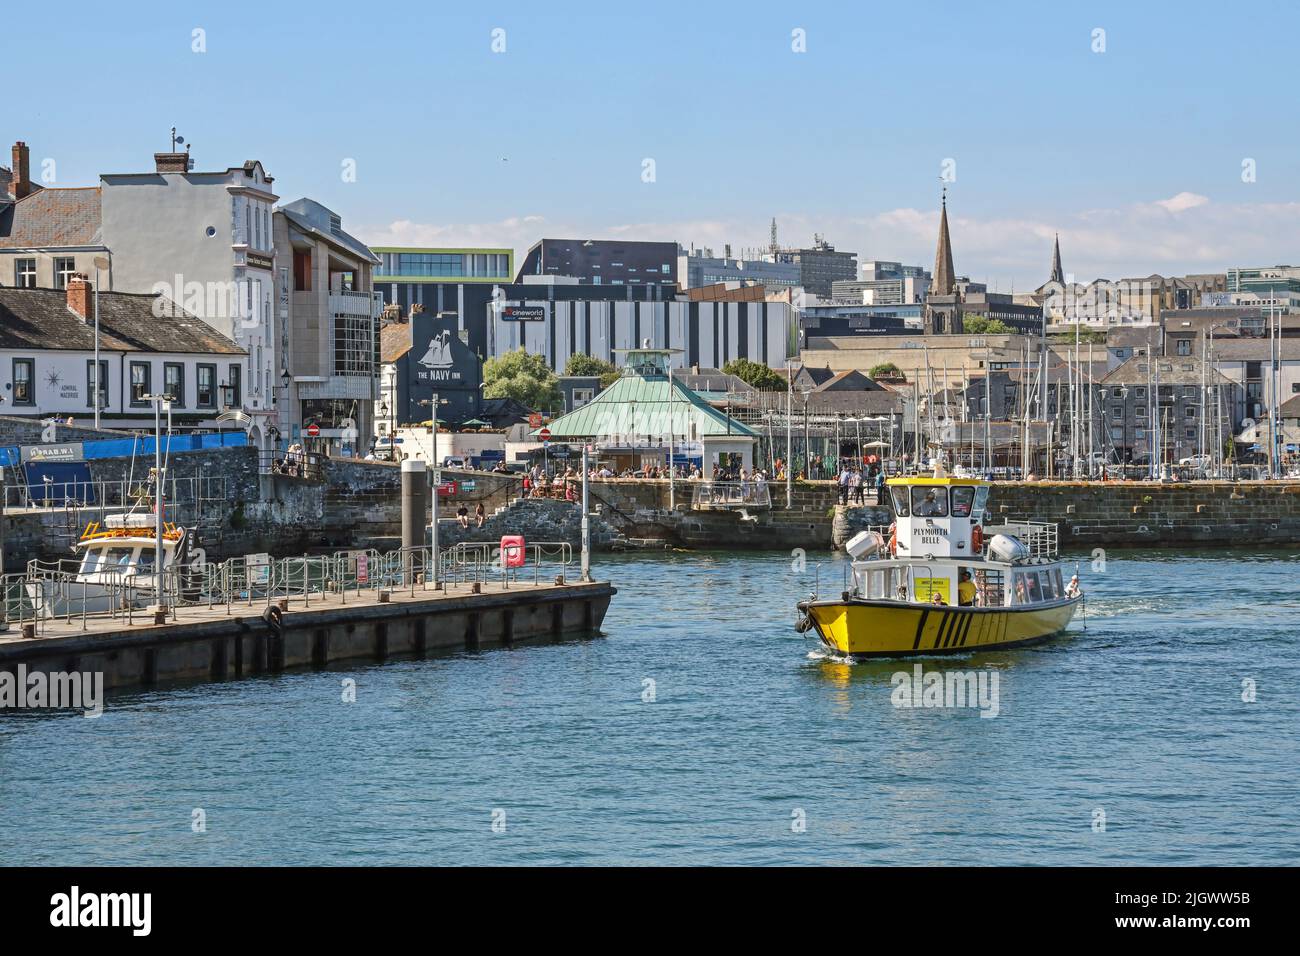 The Plymouth Belle ferry leaves the Barbican Pontoon, Plymouth, as fine weather and staycations keep pleasure trips and ferry services alive. The Barb Stock Photo